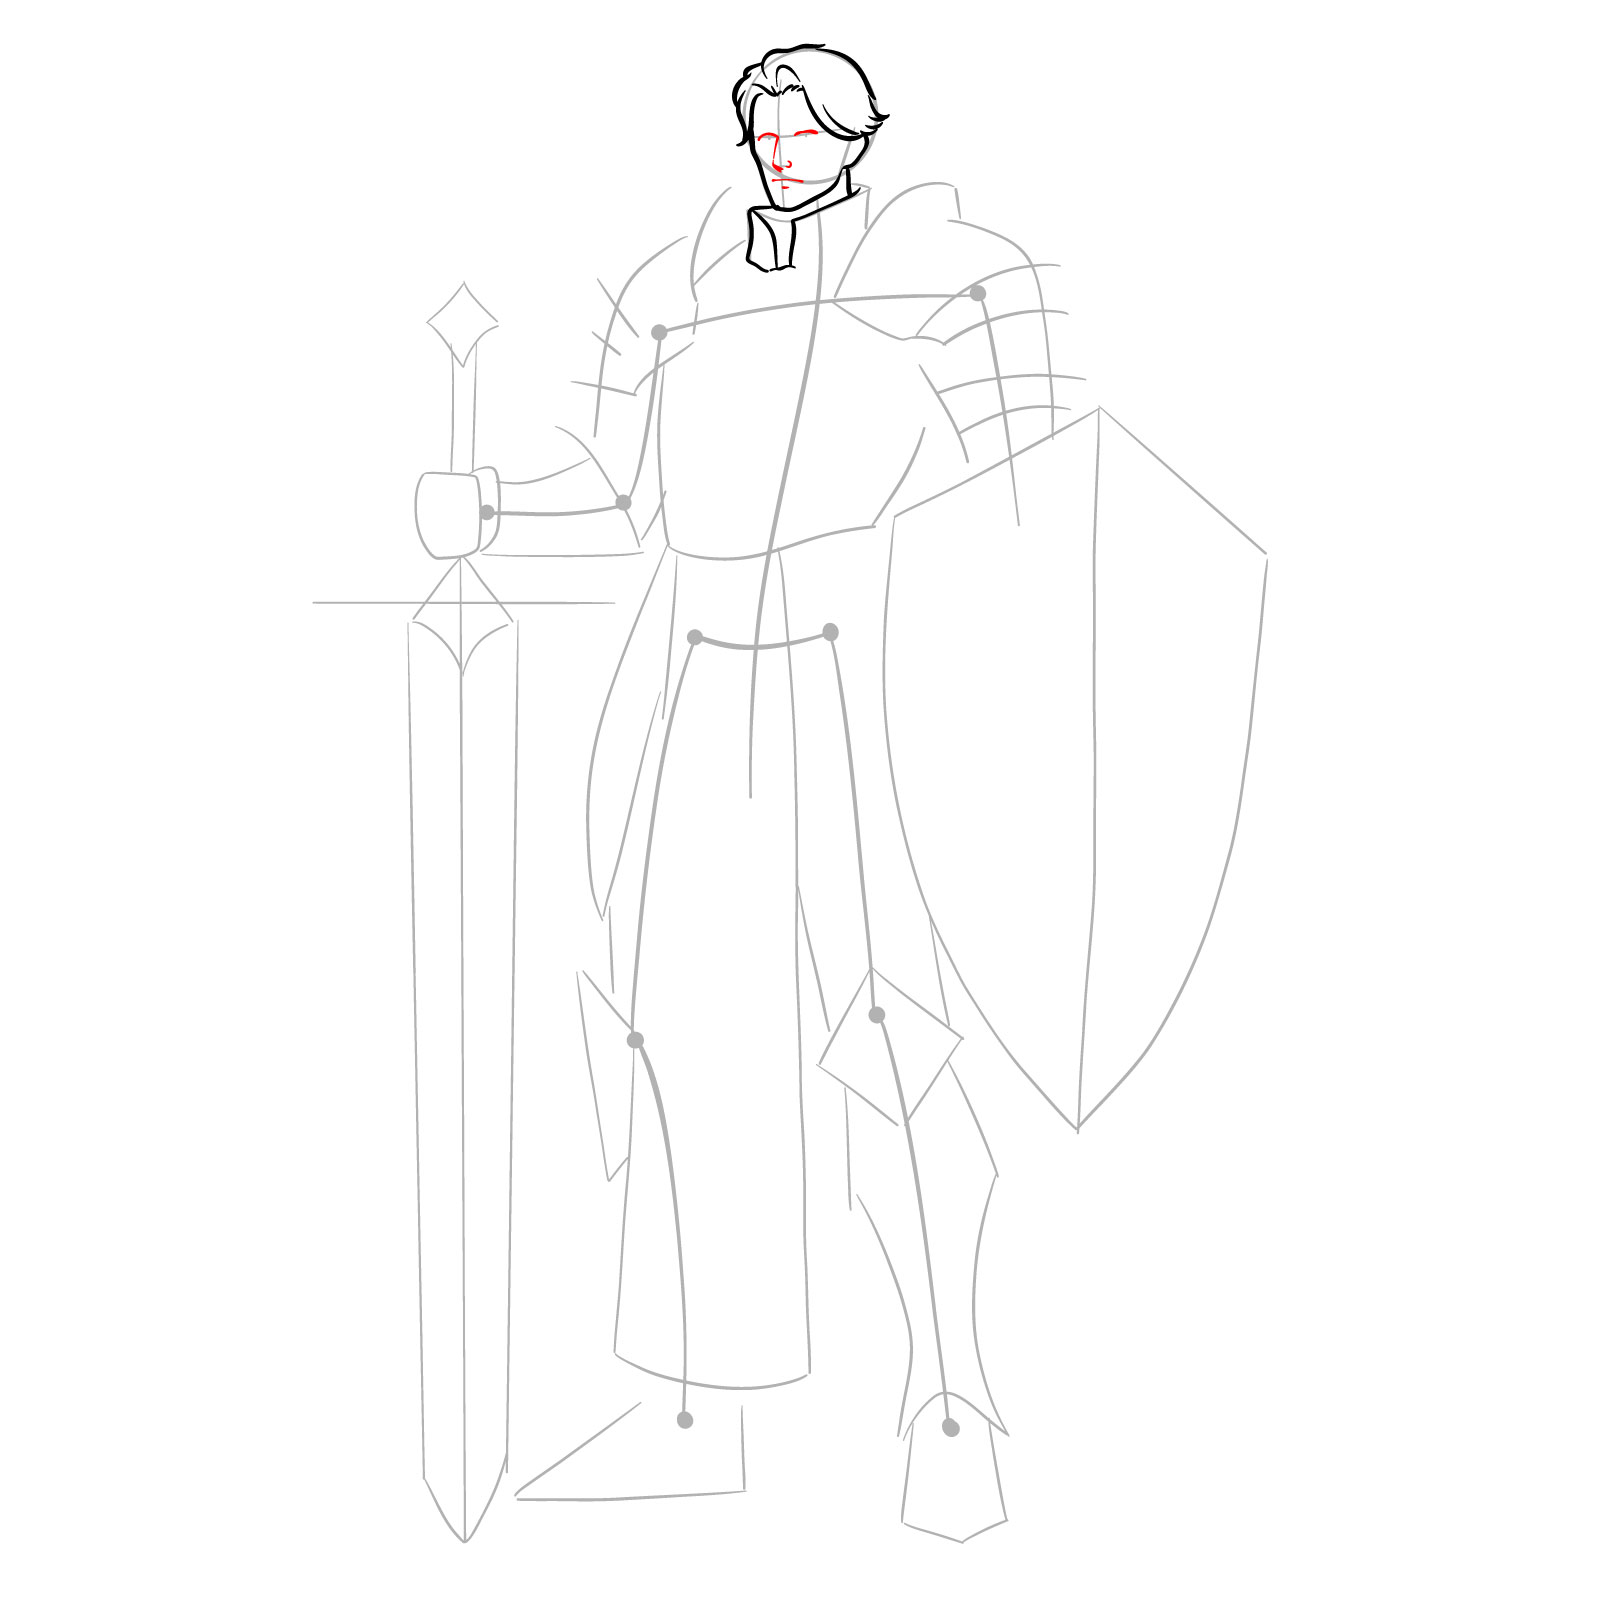 Adding upper eyelids, nose, and mouth to the paladin's face drawing - step 07